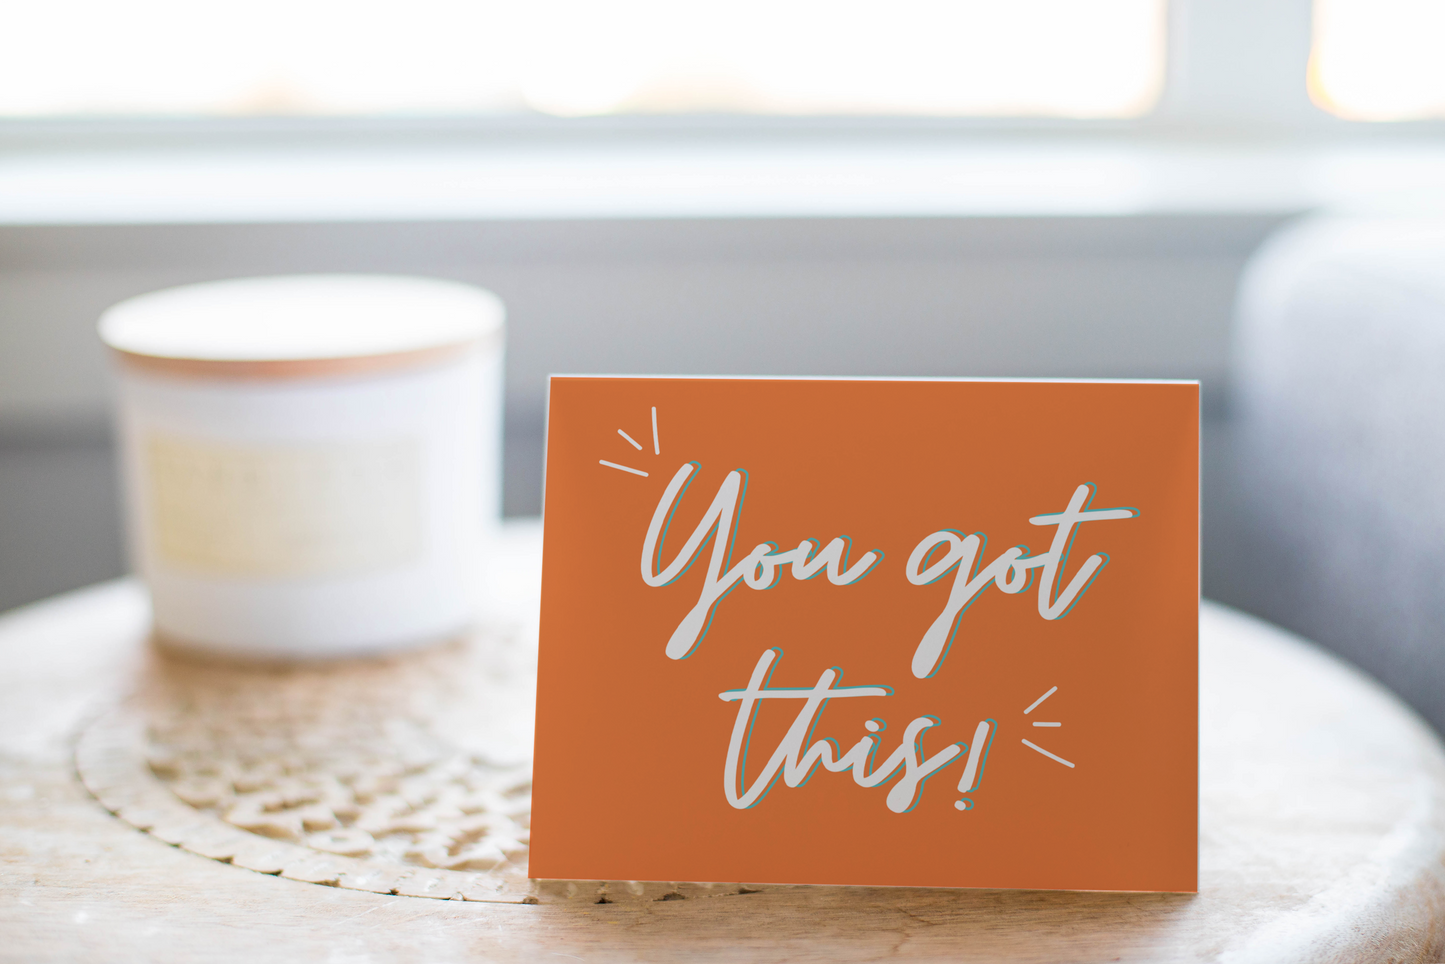 You Got This!: Encouragement Greeting Card.